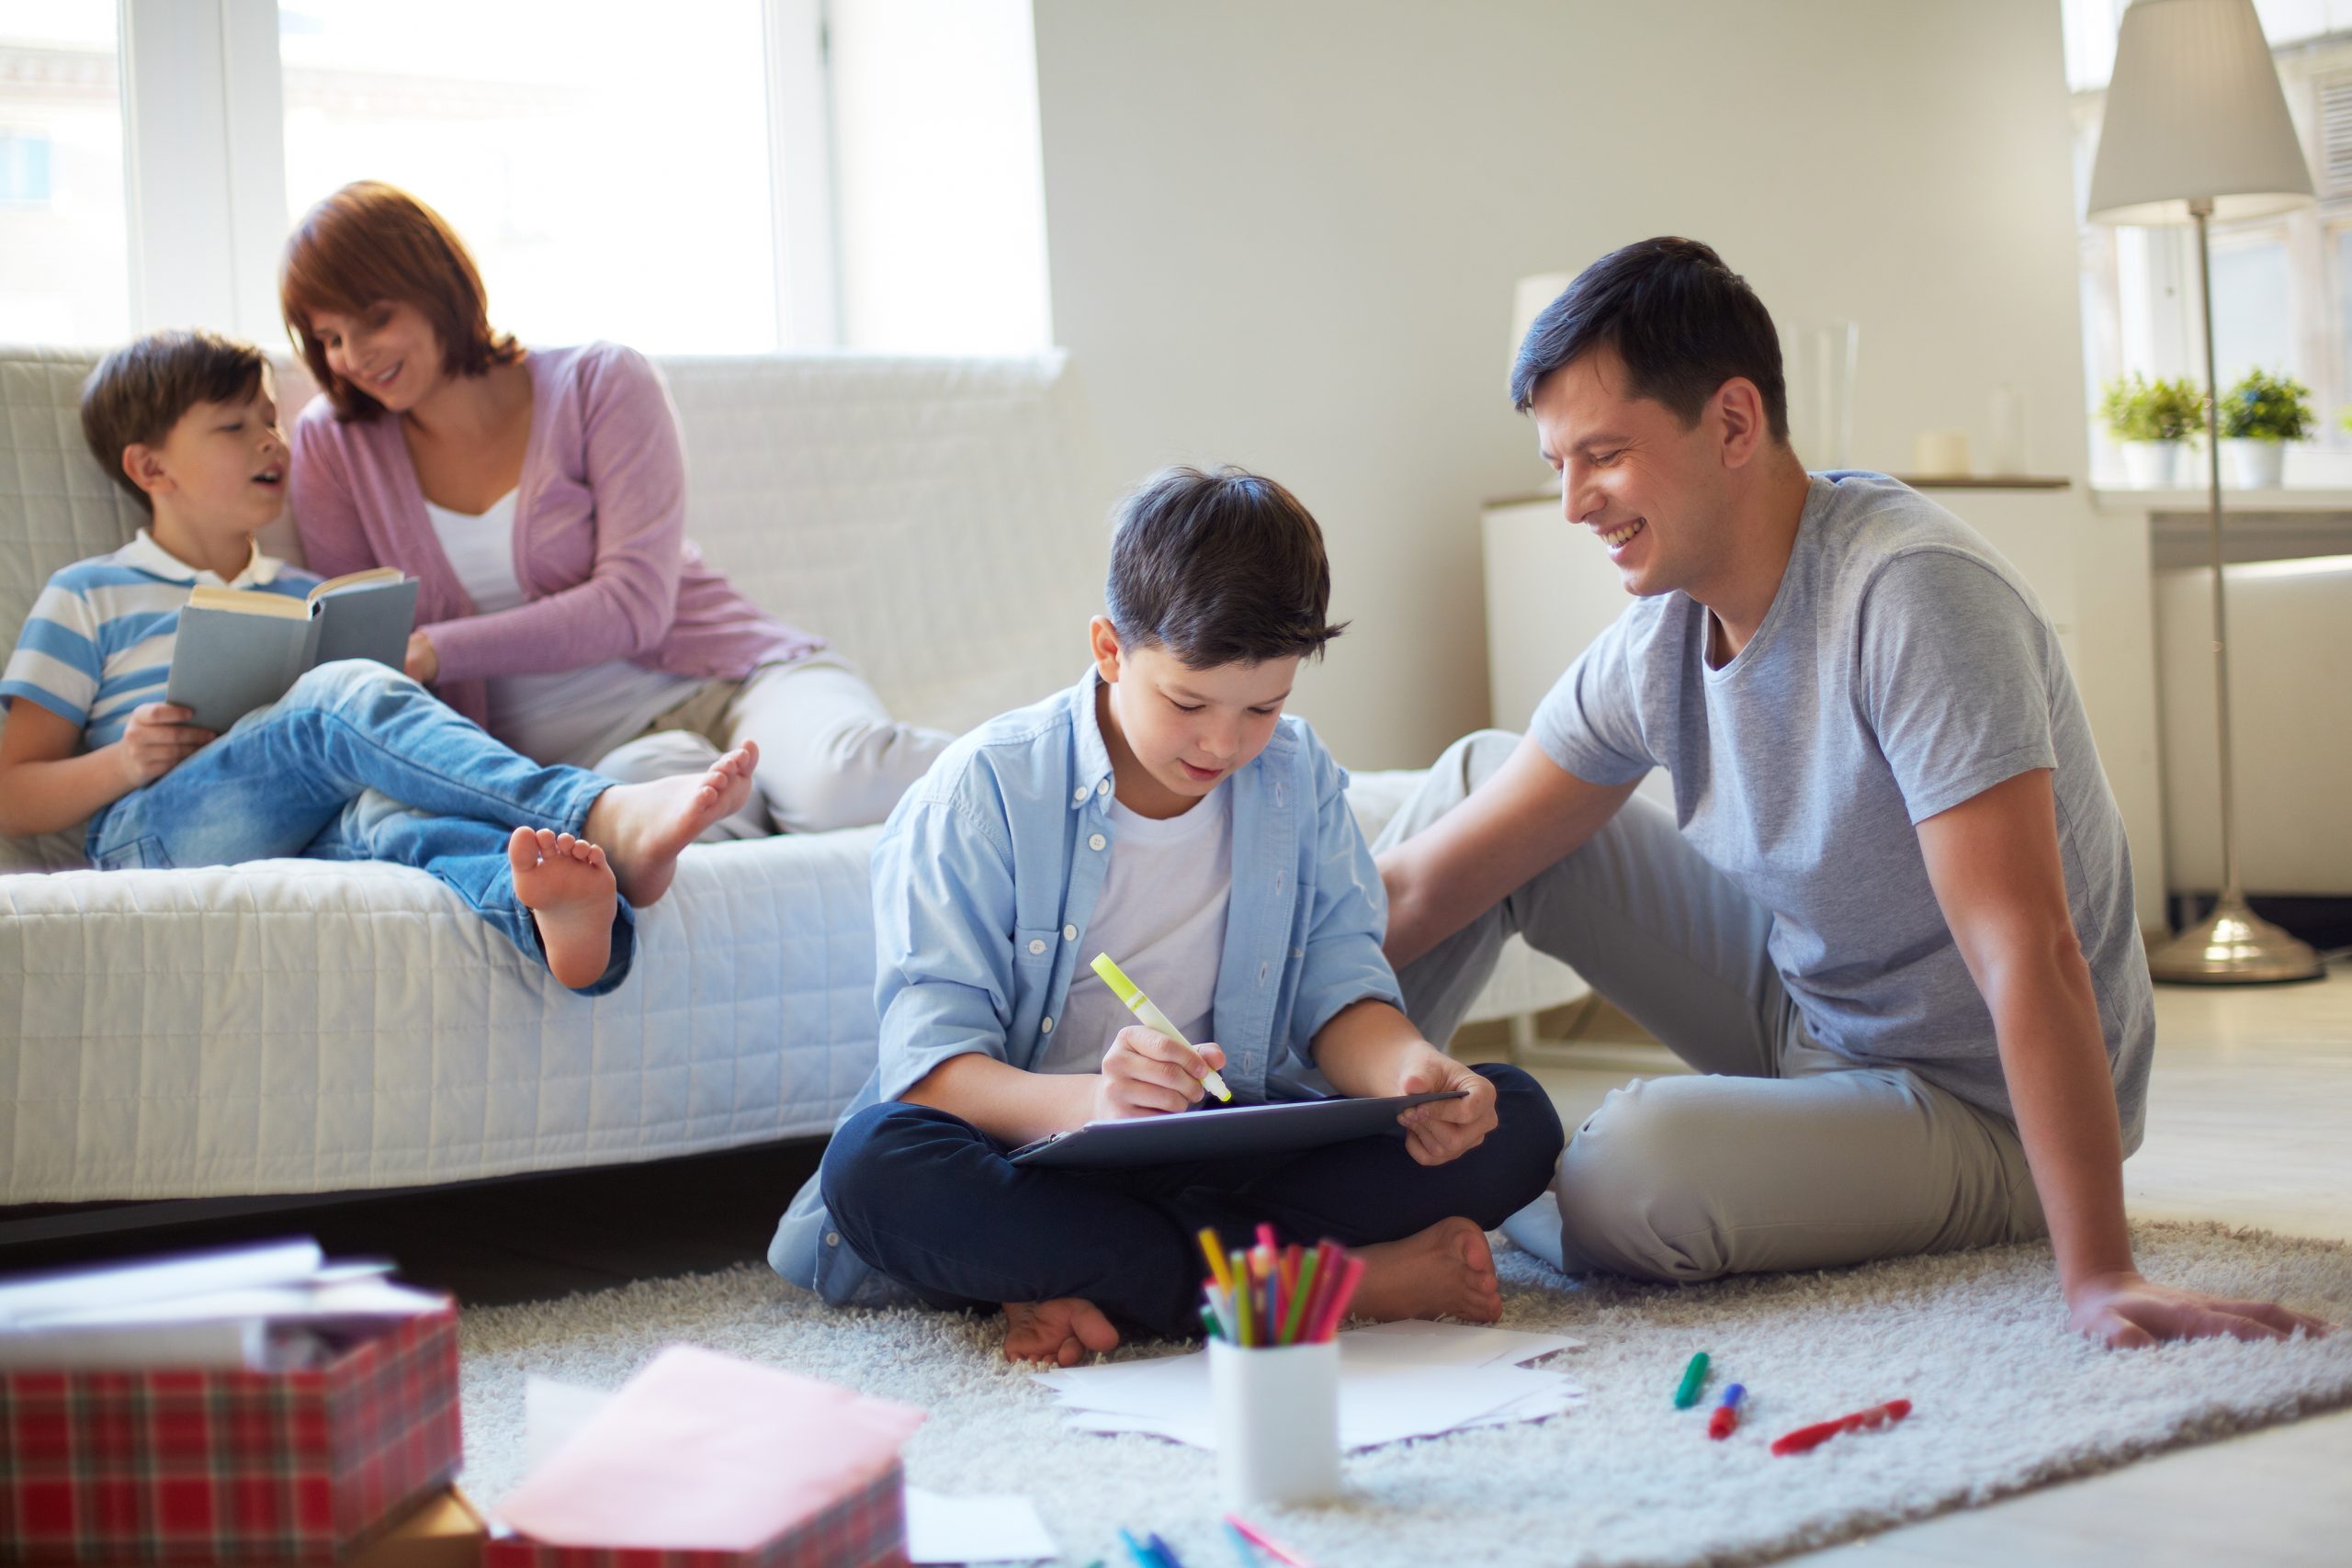 How To Create a Safe Home for Your Family